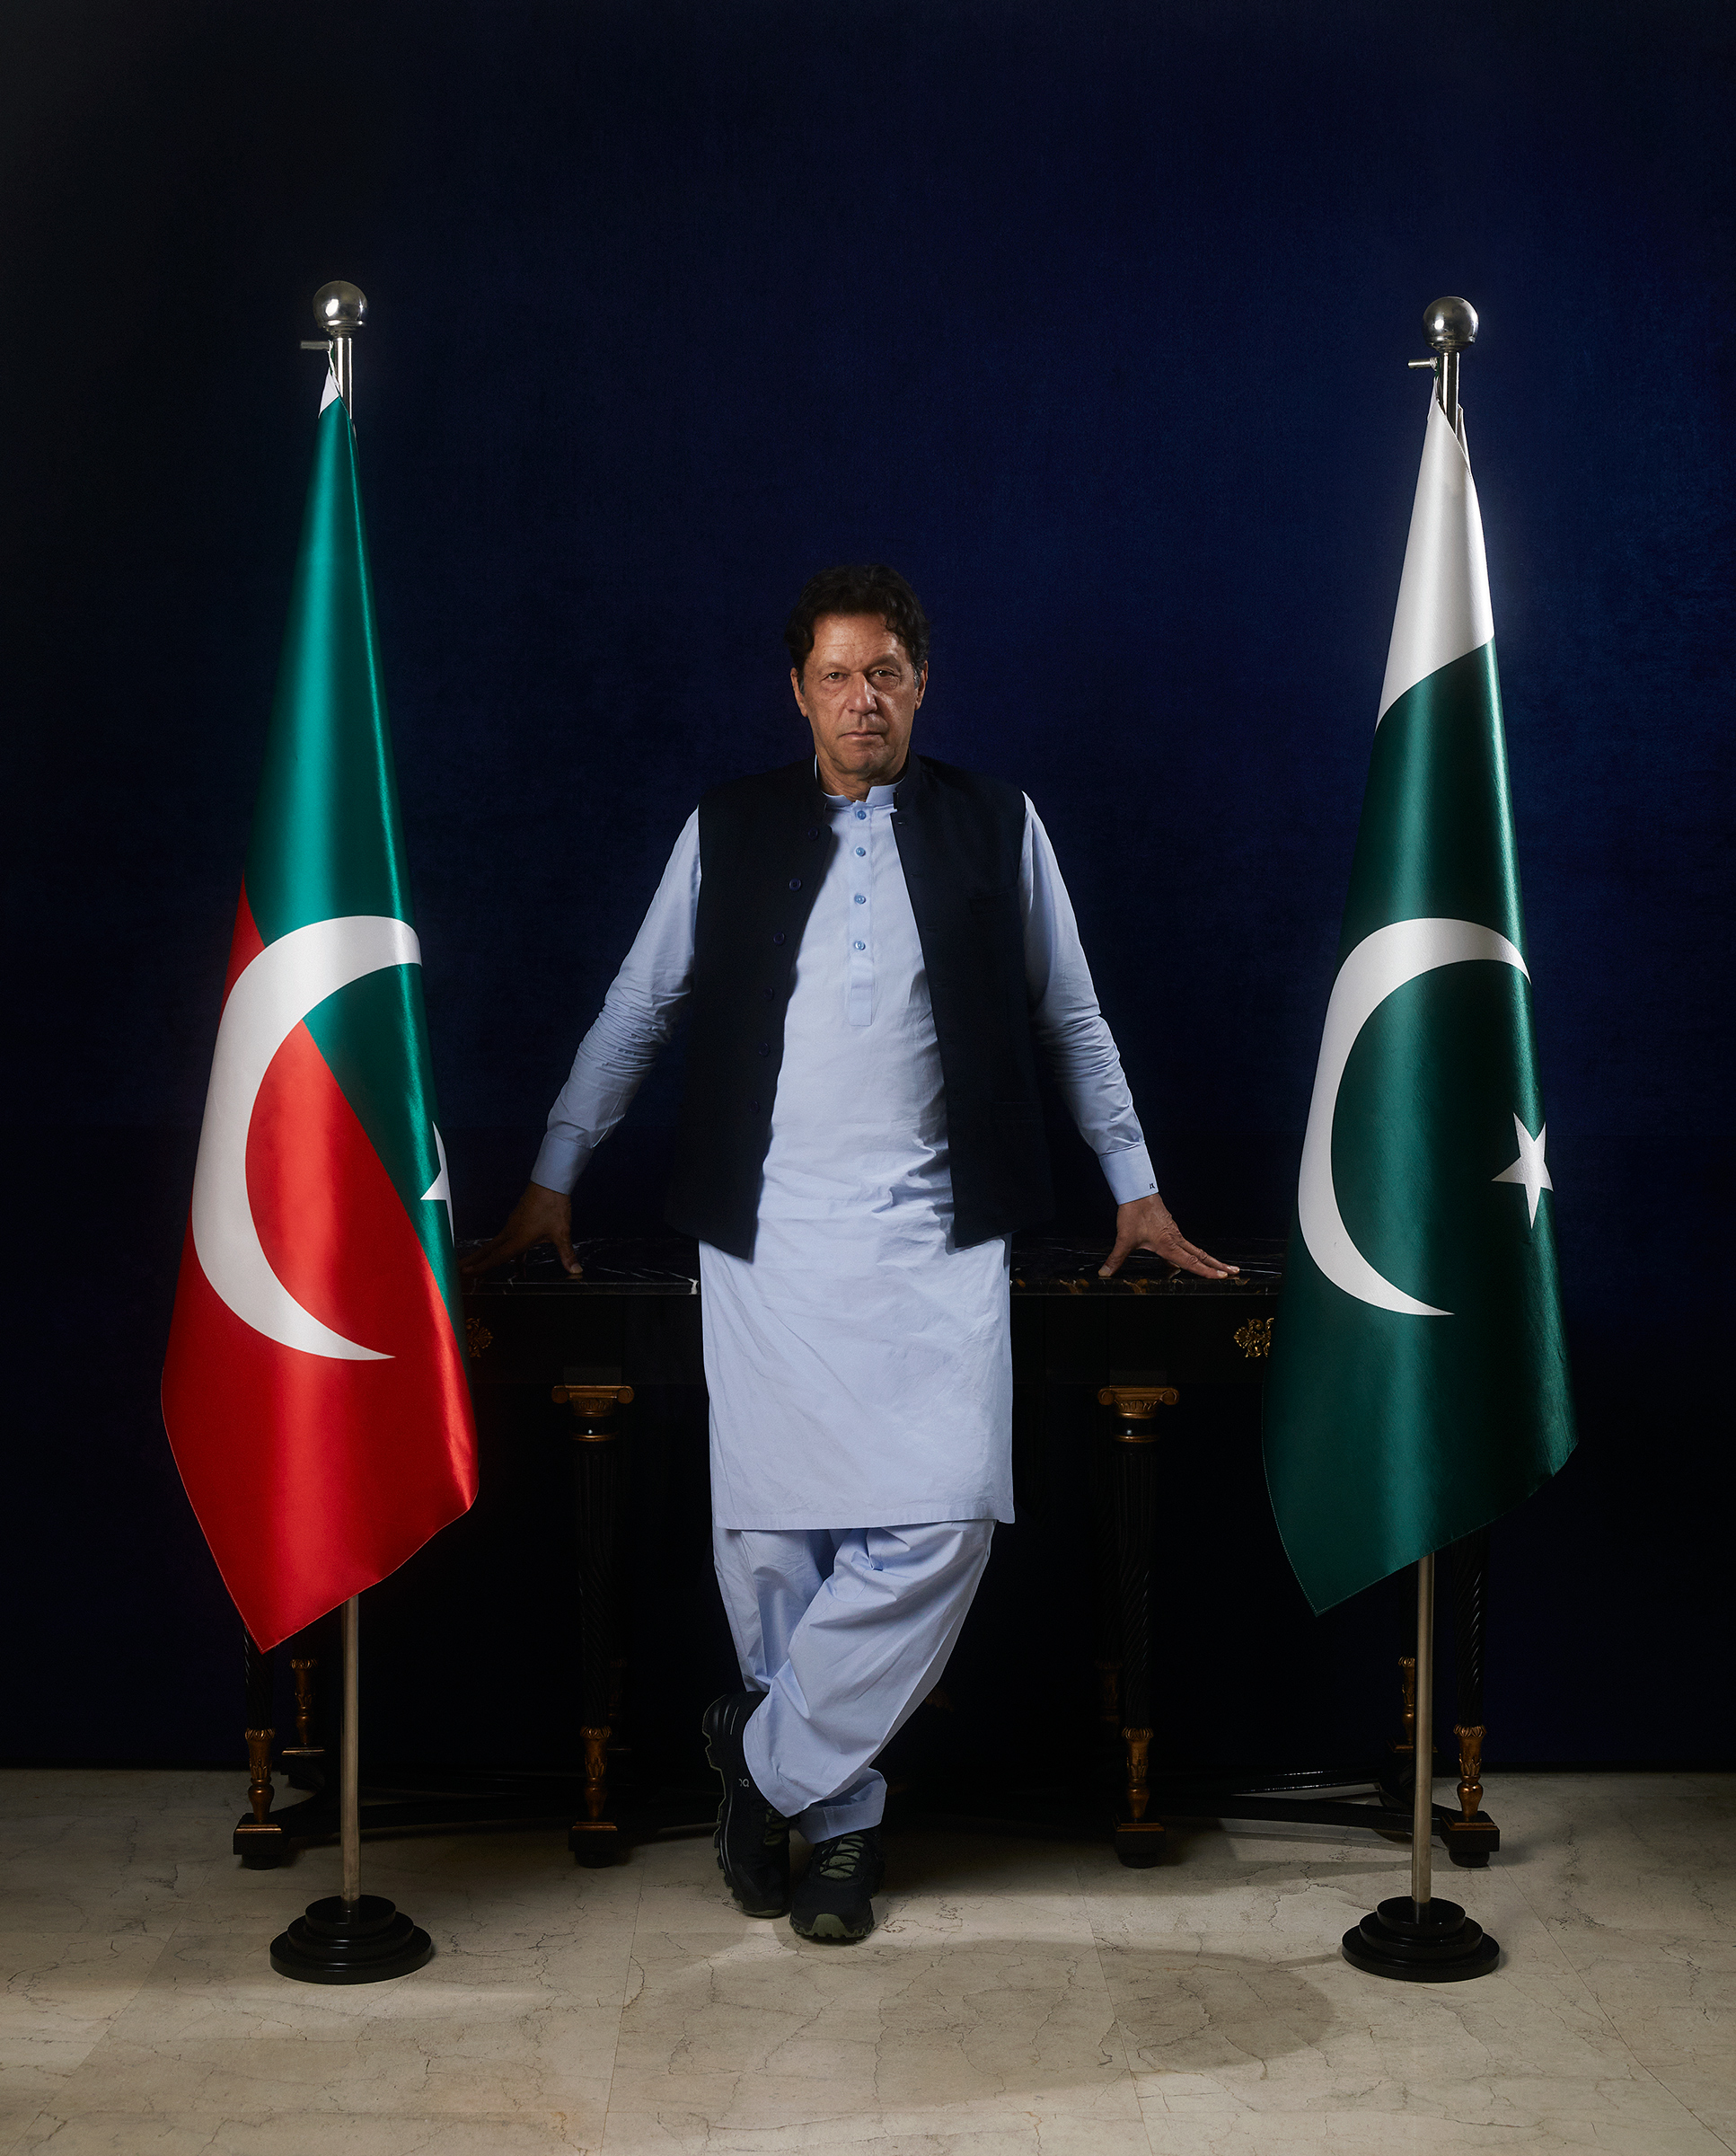 Khan in his Lahore residence on March 28. (Umar Nadeem for TIME)